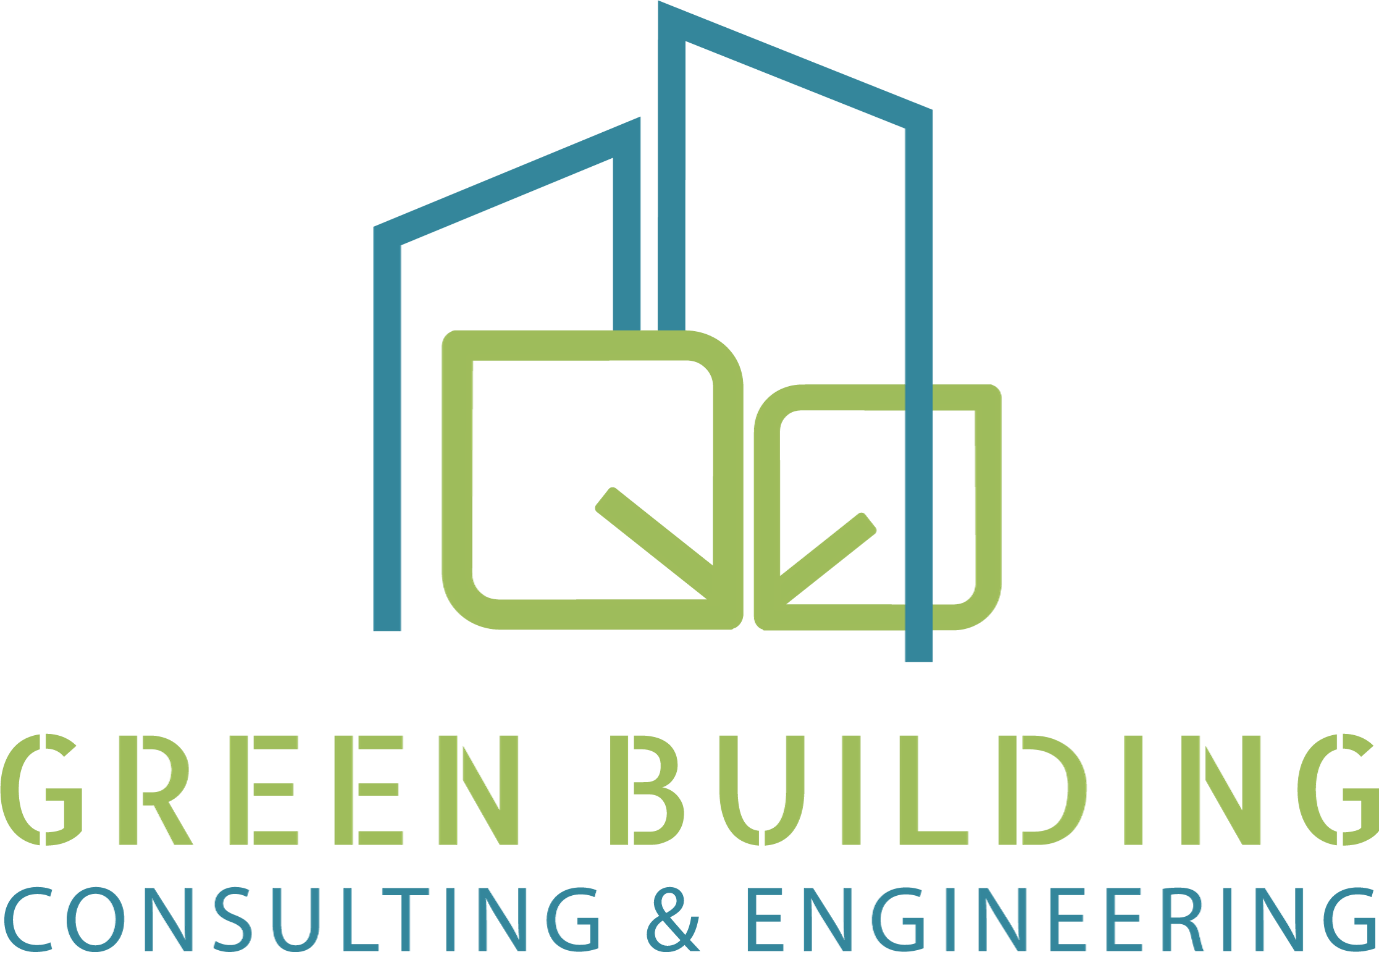 Green Building Consulting & Engineering (GBCE)